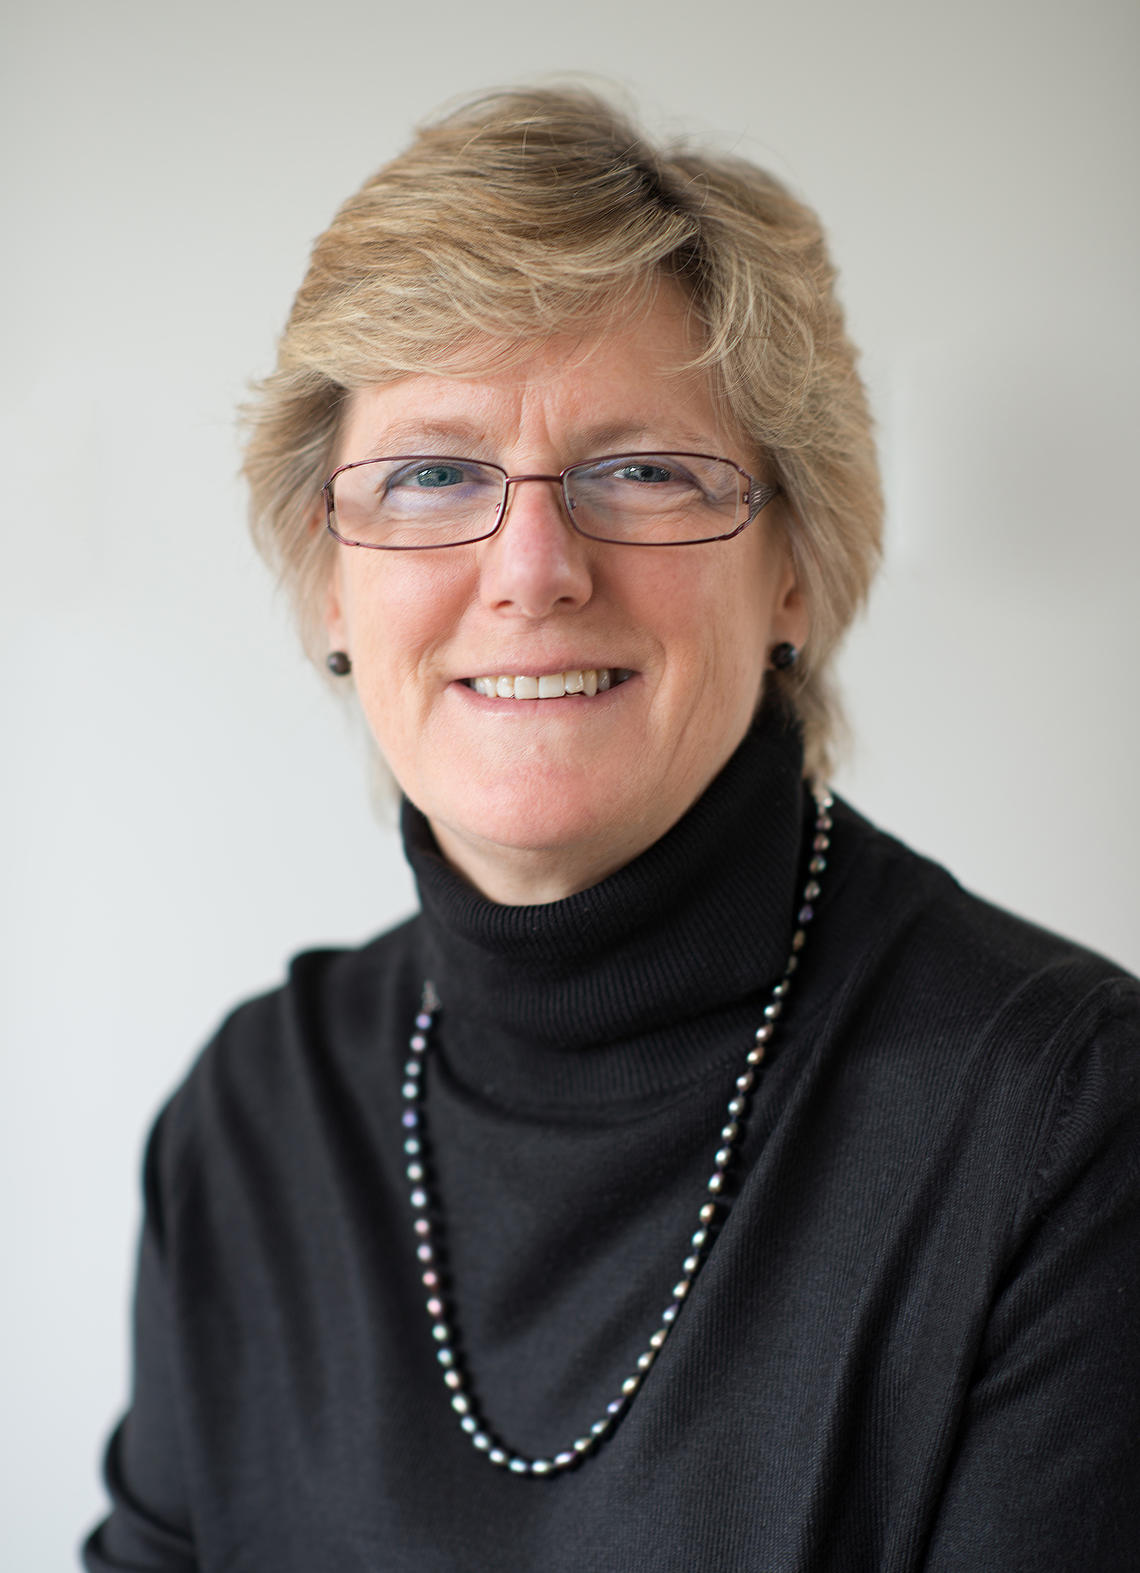 England's chief medical officer Dame Sally Davies is the 2018 Cy Frank Legacy Lecturer. She spoke Sept. 12 at the University of Calgary.